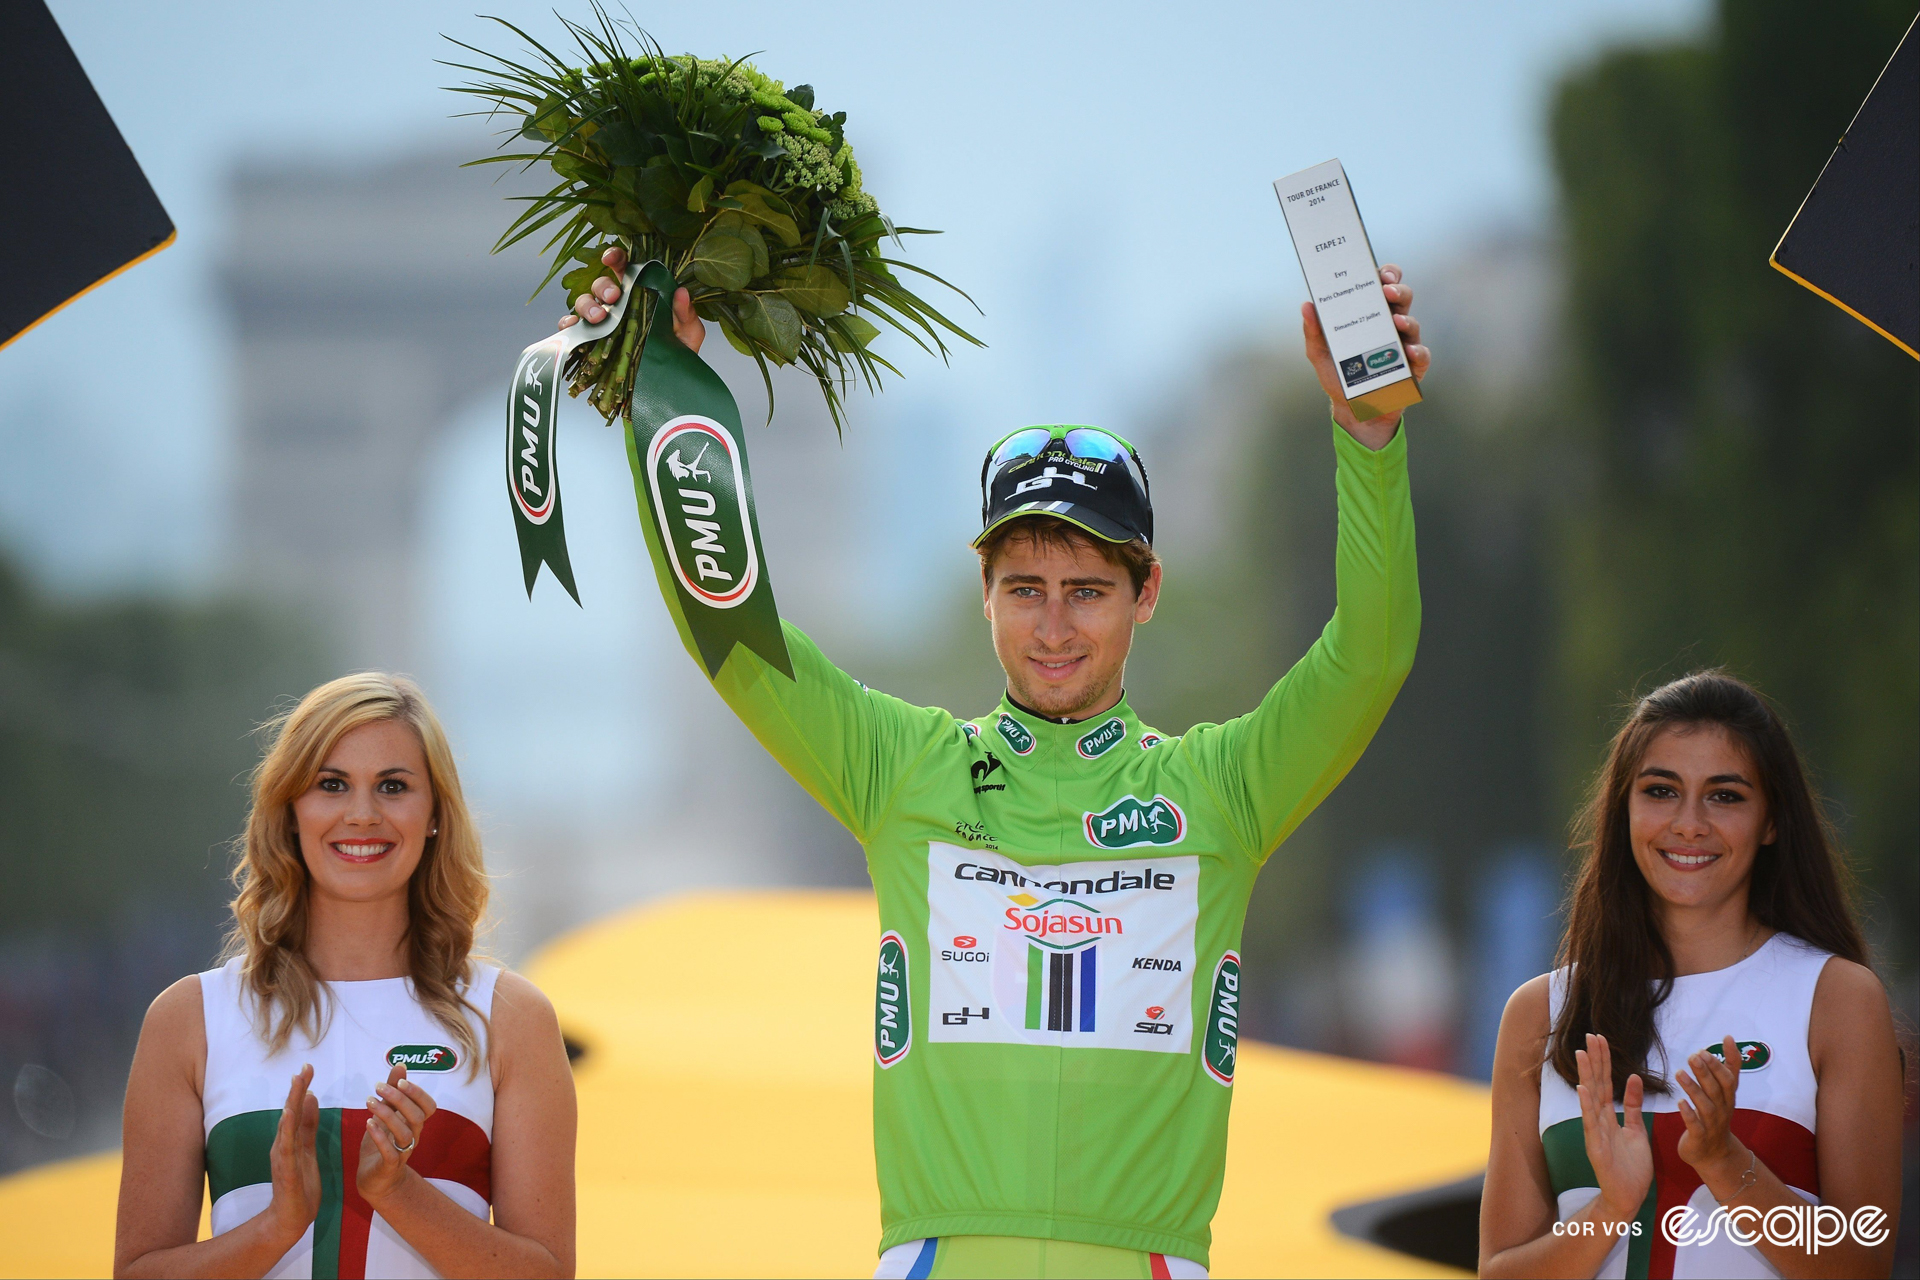 Peter Sagan on the final podium at the 2014 Tour de France wearing green, holding a bouquet of flowers and trophy, with a podium hostess on either side of him.